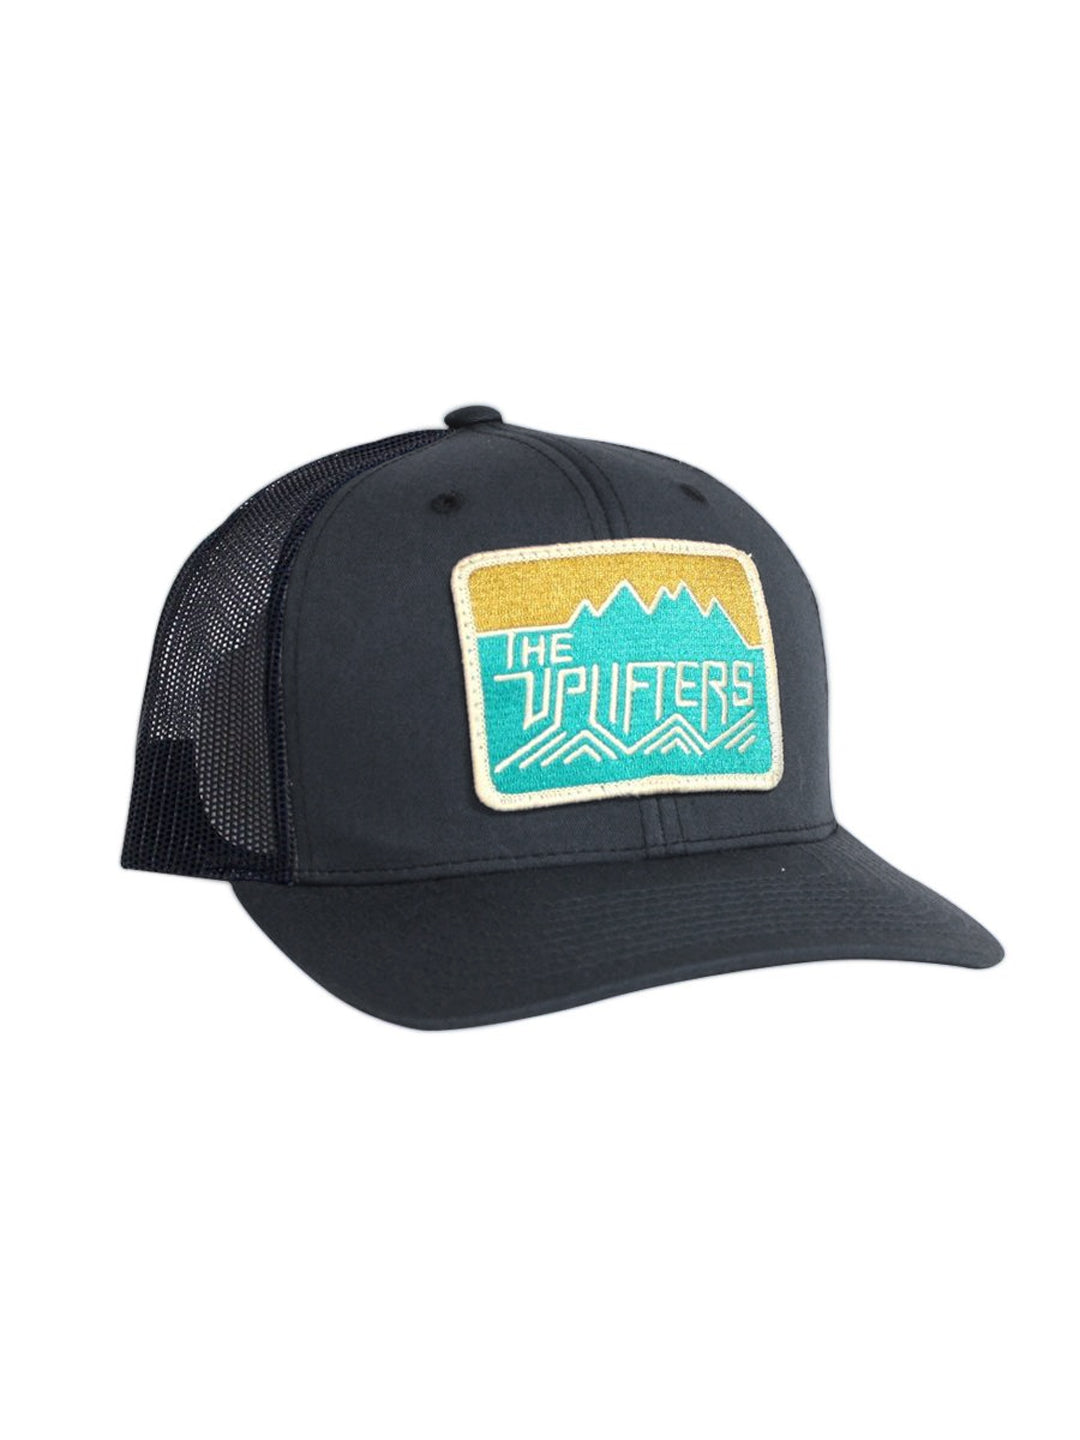 Classic Uplifters Patch Hat in Grey